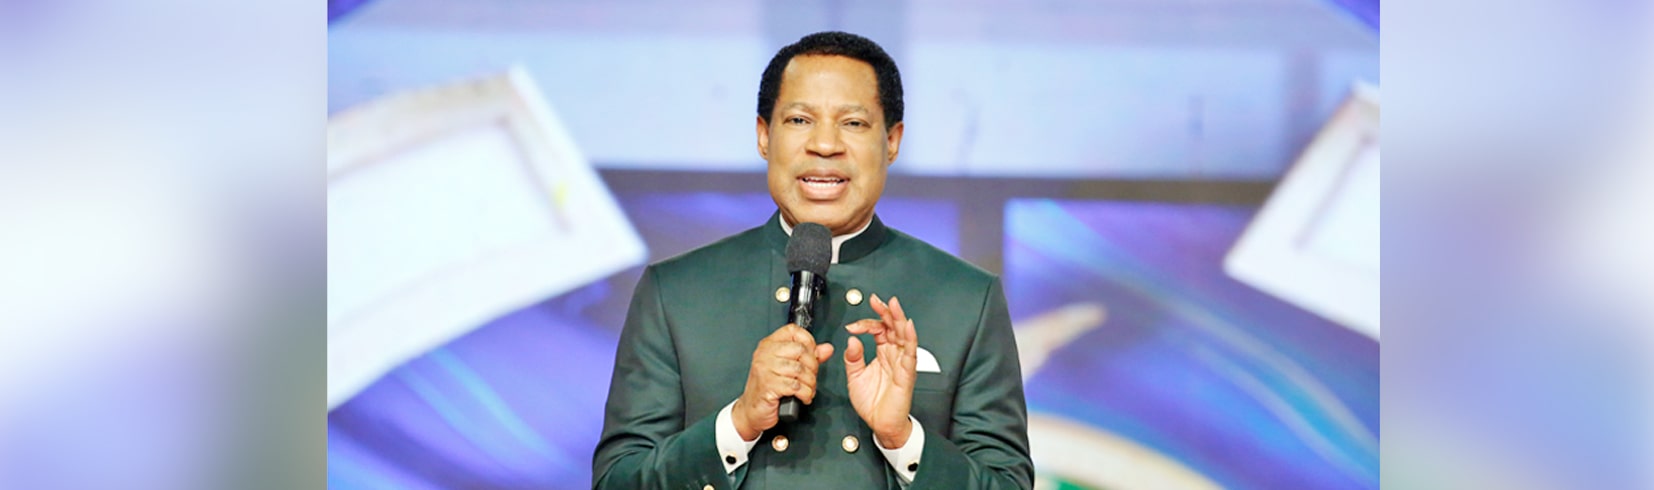 WORDS ARE SEEDS – RHAPSODY OF REALITIES [TUE APR 11]